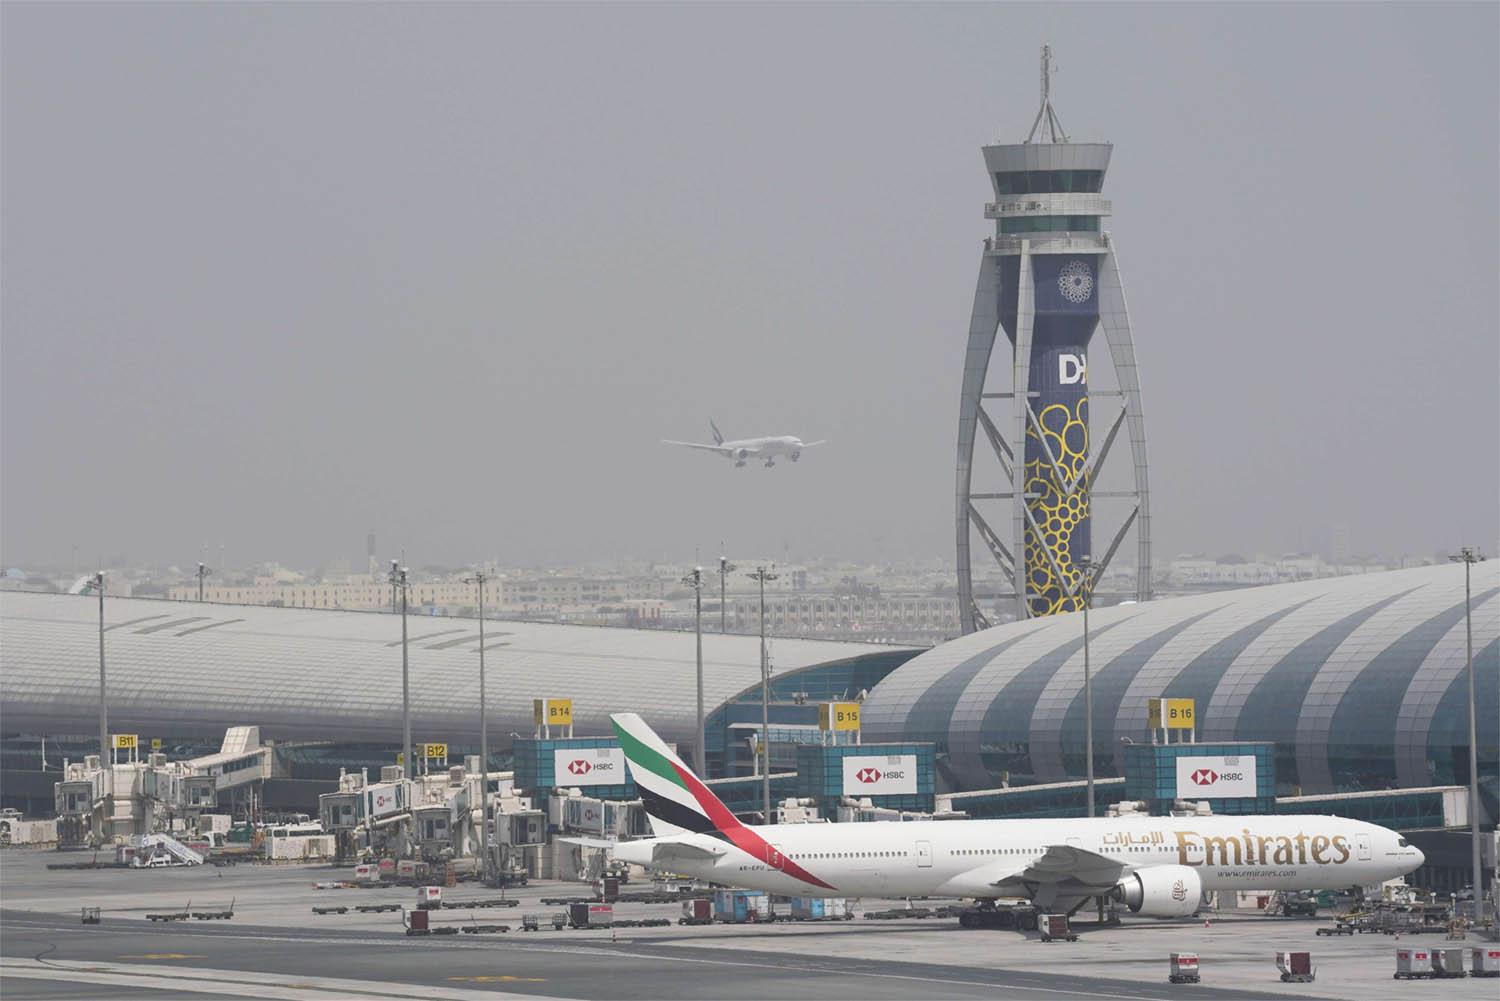 Dubai airport screened 27.9 million passengers in the first half of the year